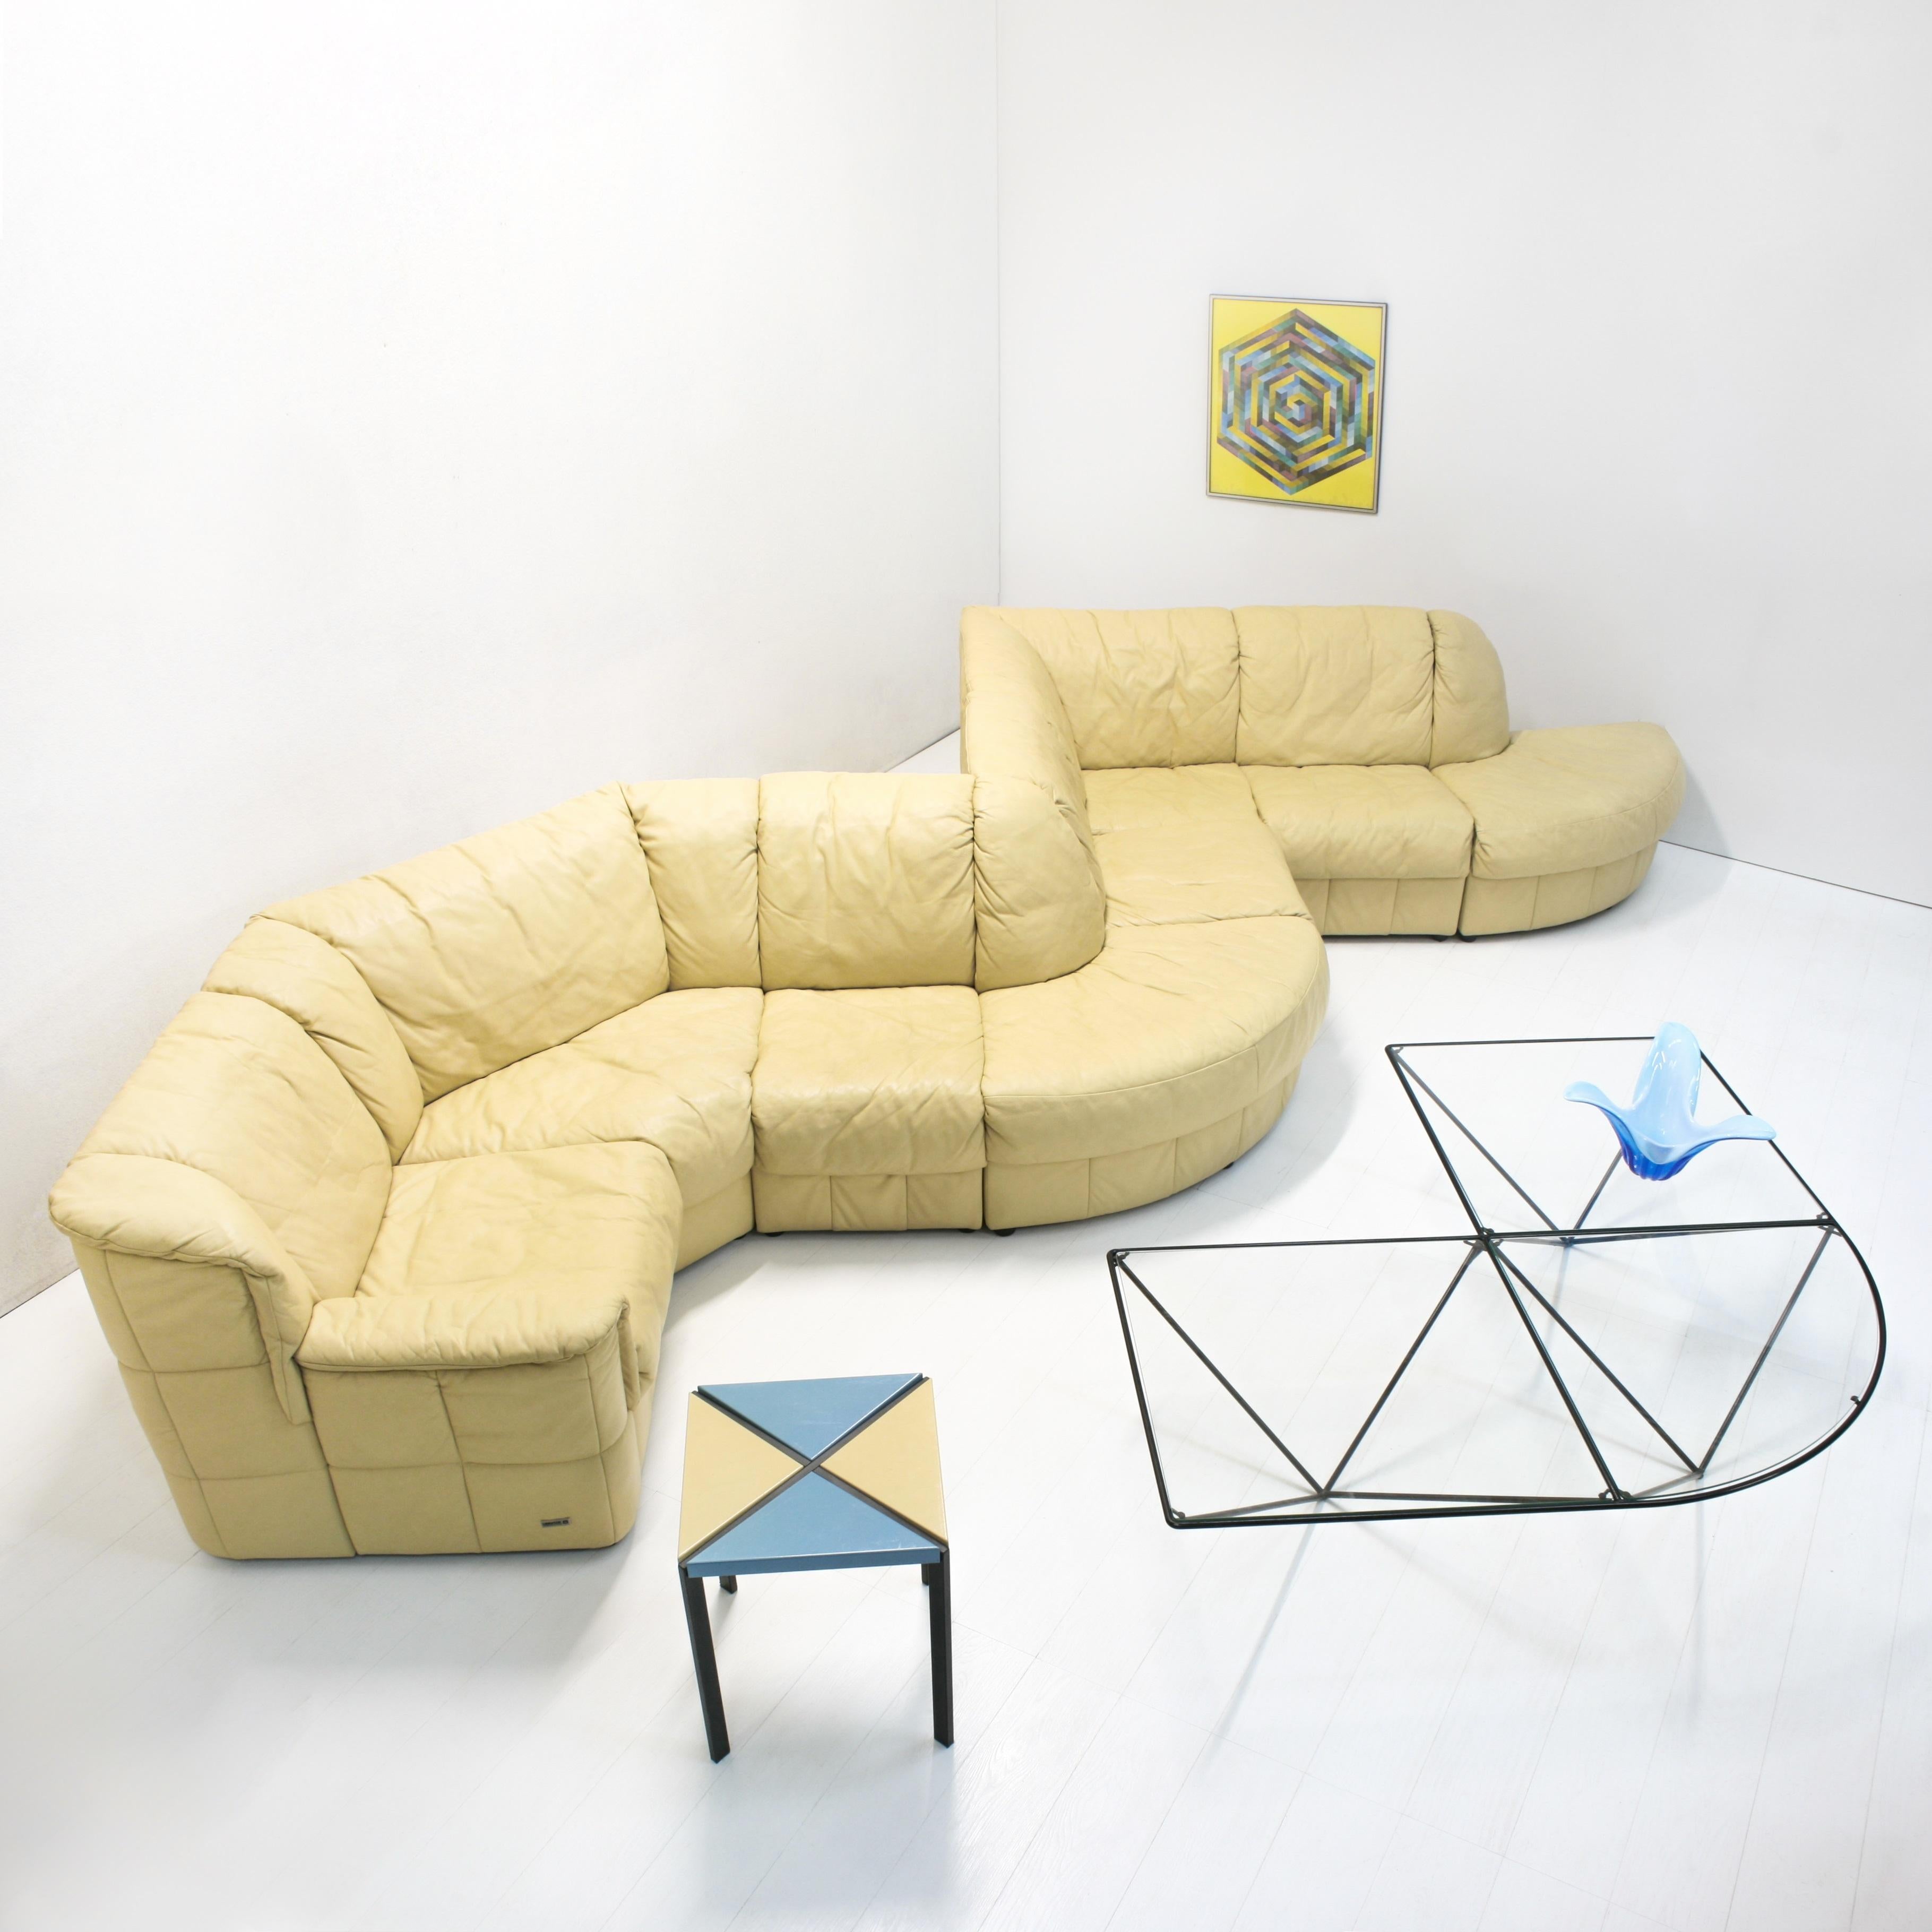 This 1990s pastel yellow/beige modular leather sofa with quilted back and with near endless possibilities to place was created by Laauser and exists of the following elements:
- 2 quarter circle elements (85x85x77cm)
- 2 straight elements